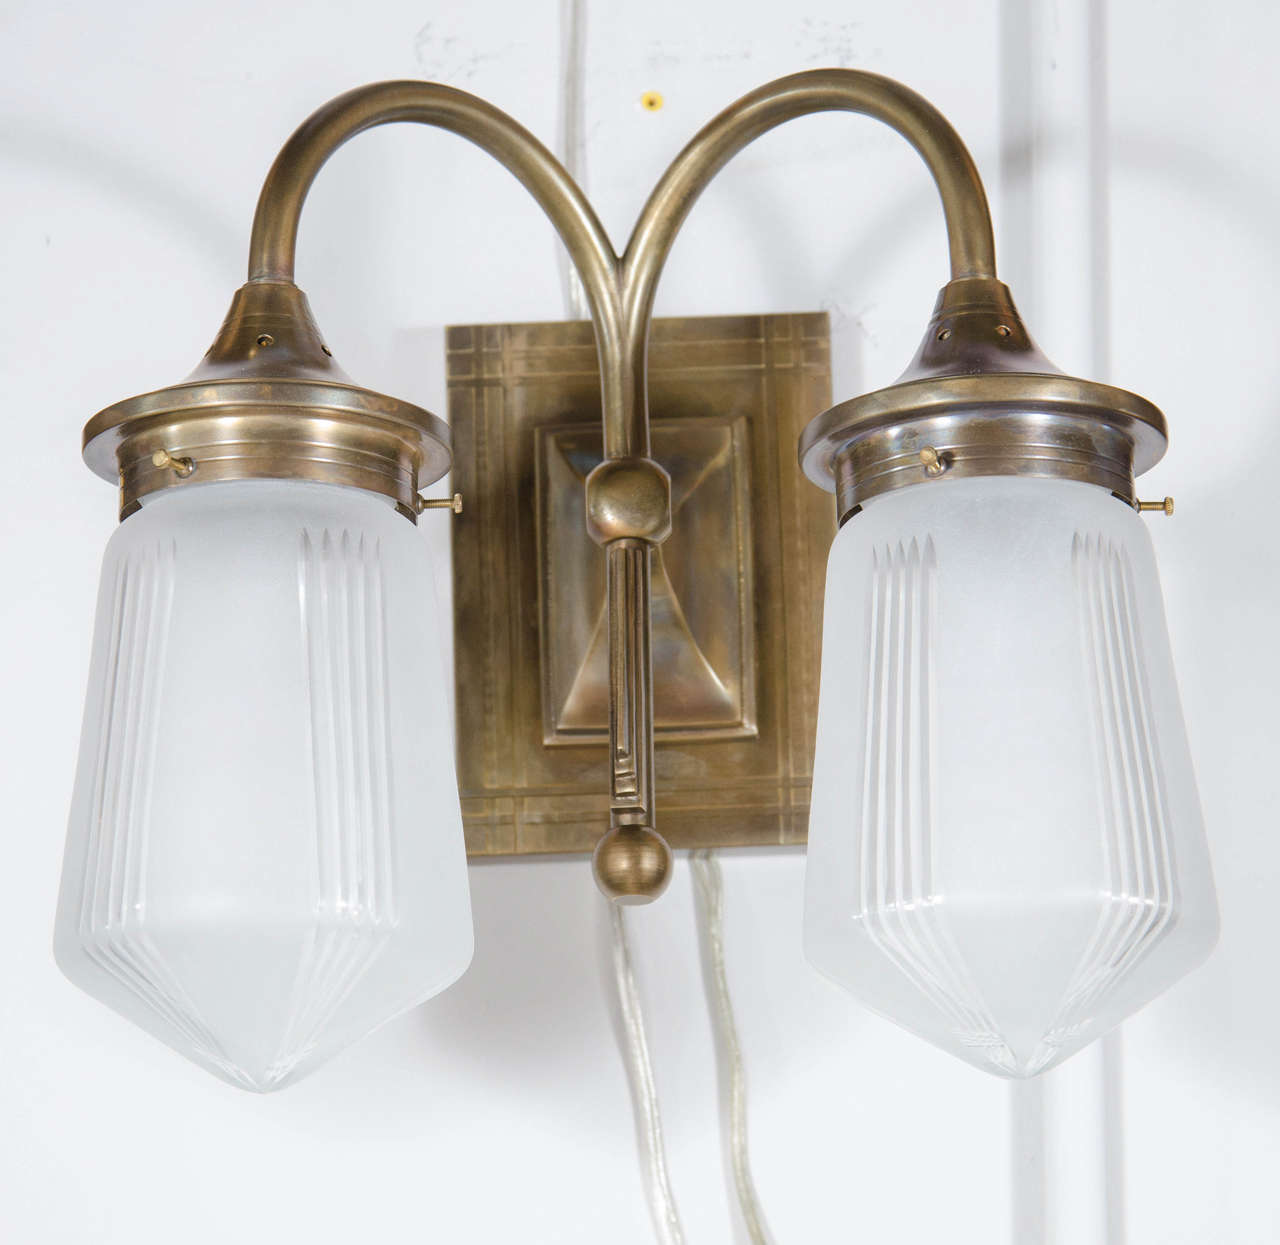 This stunning pair Art Deco style sconces features two etched globes with frosted glass and bronze fittings.  They would look great in any room or decor.  They are in excellent condition and have been completely rewired. Could also be used over a